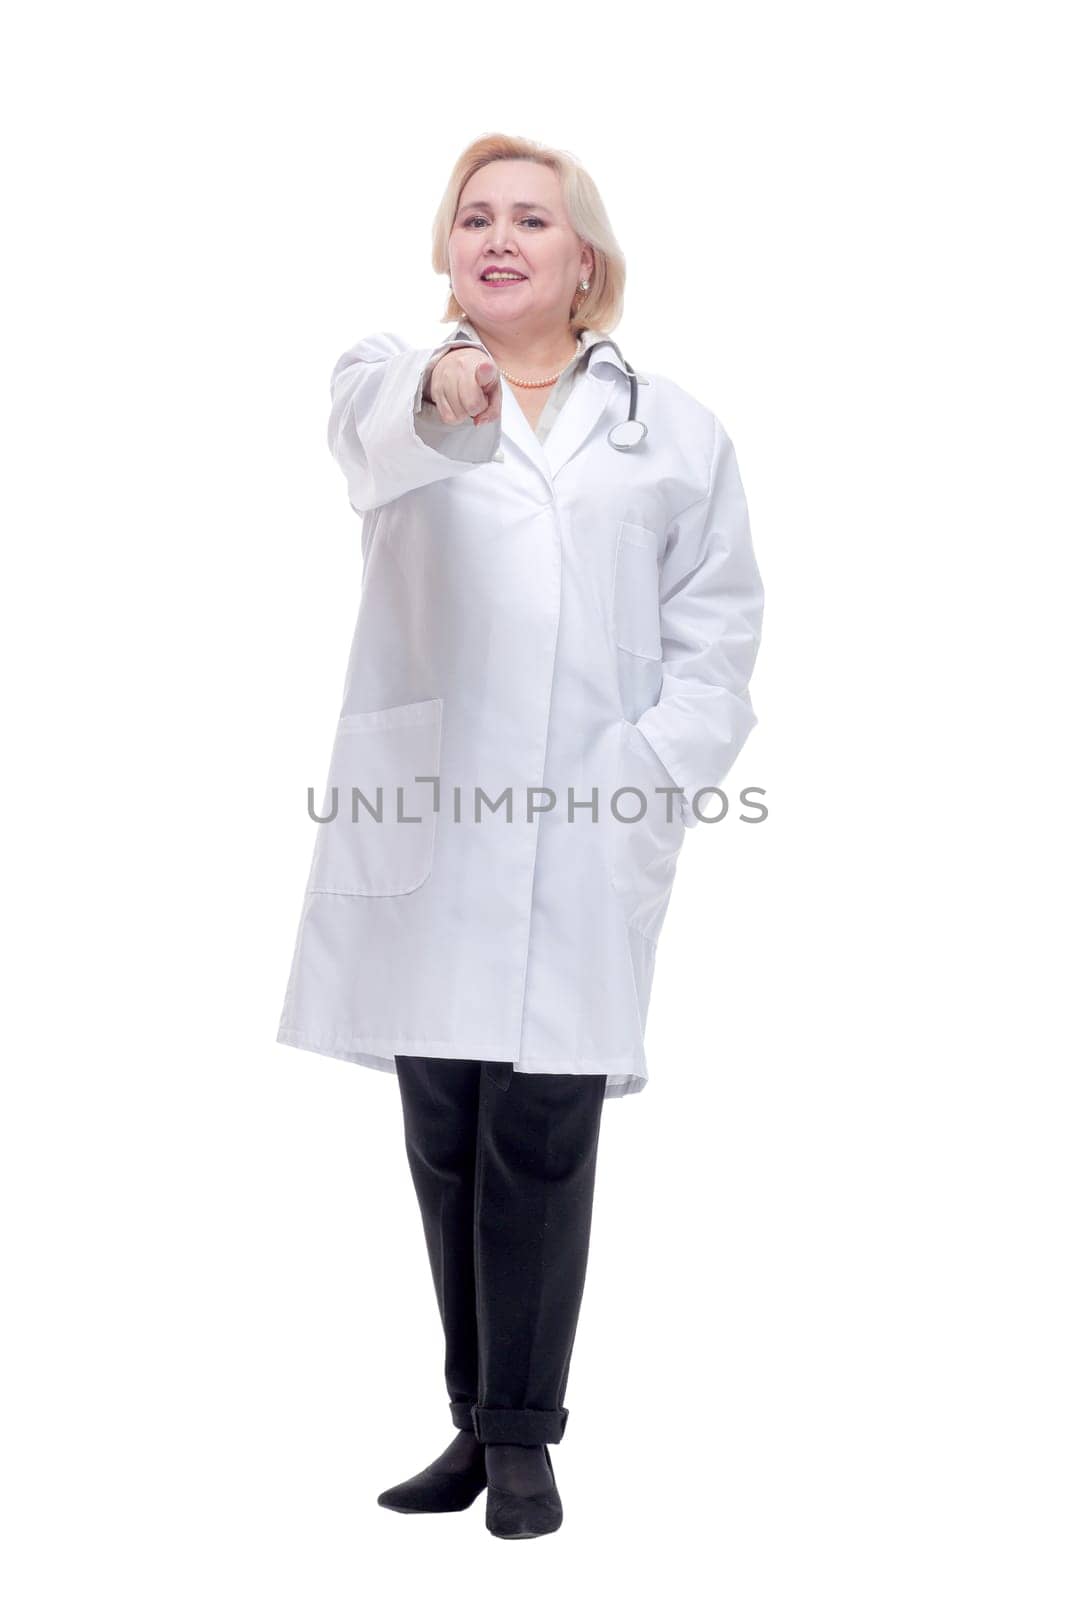 Smiling medical doctor woman with stethoscope by asdf